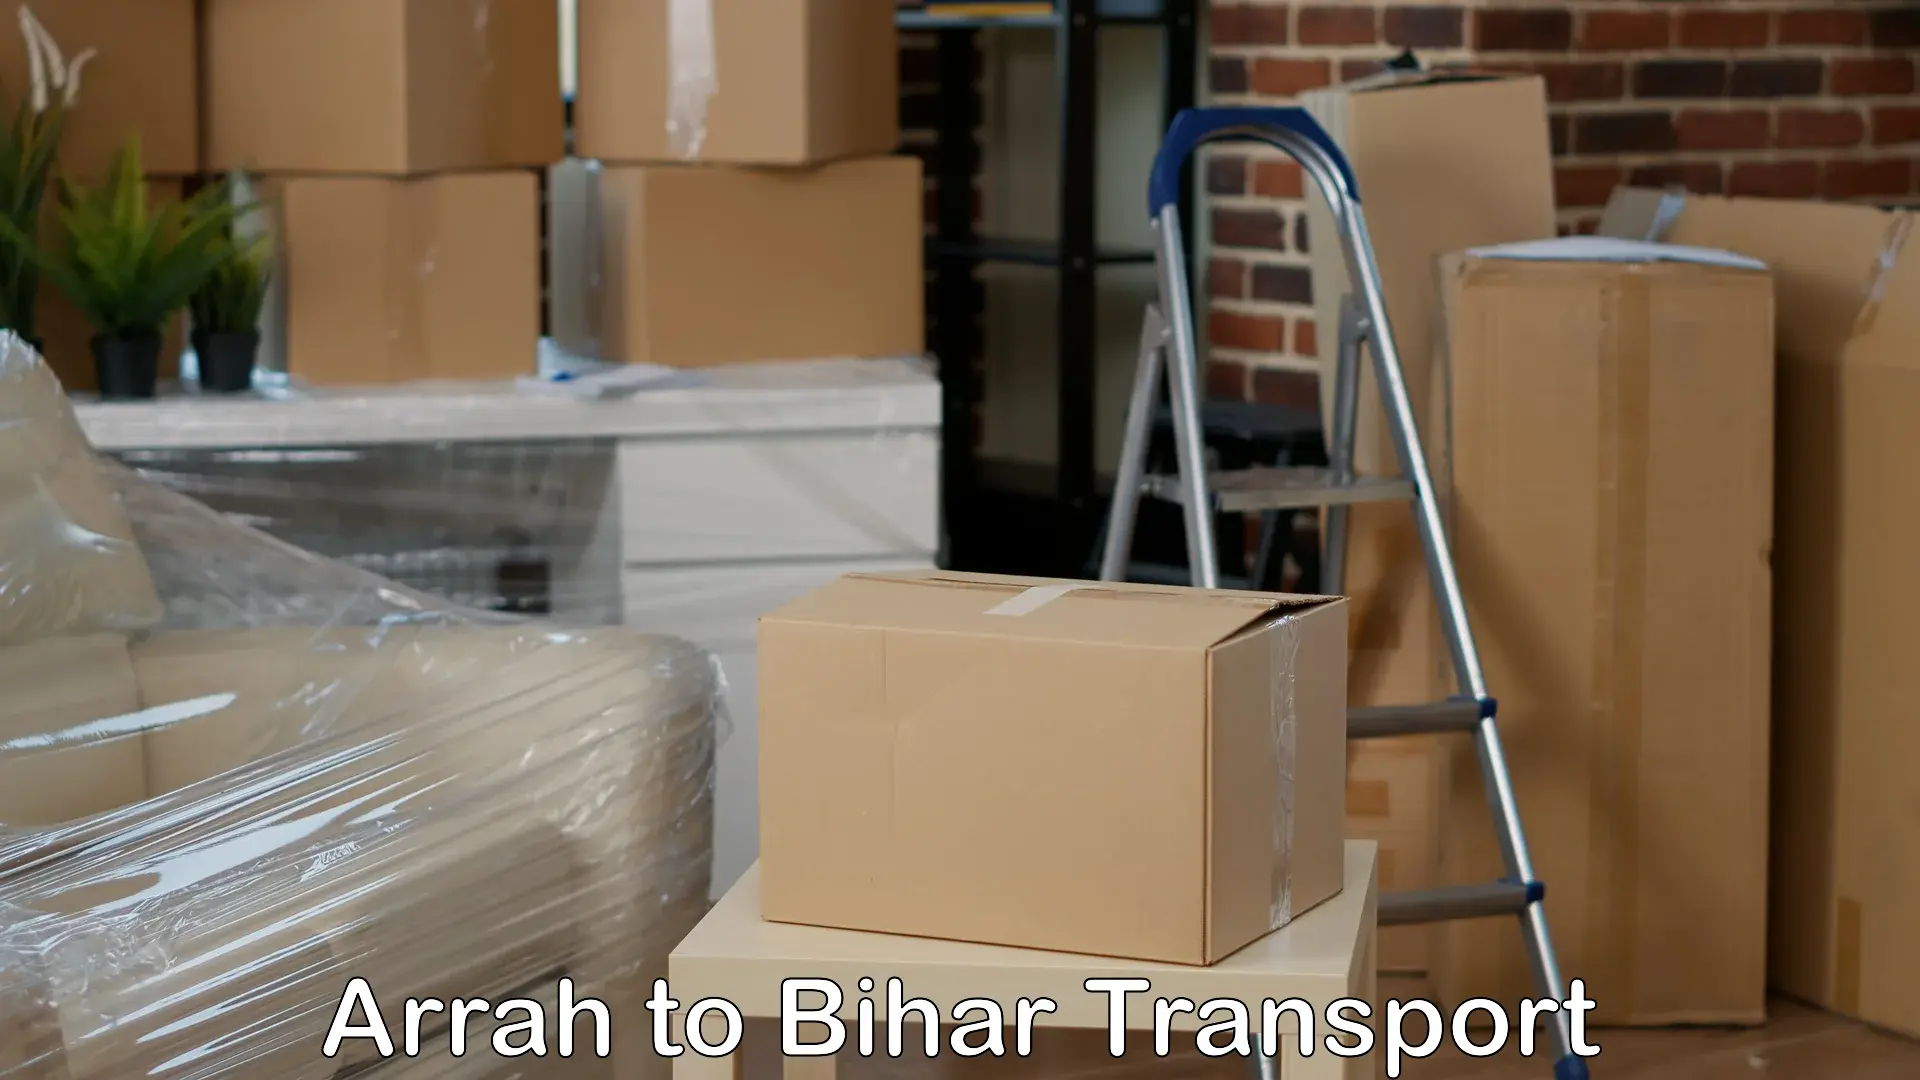 Truck transport companies in India Arrah to Kuchaikote